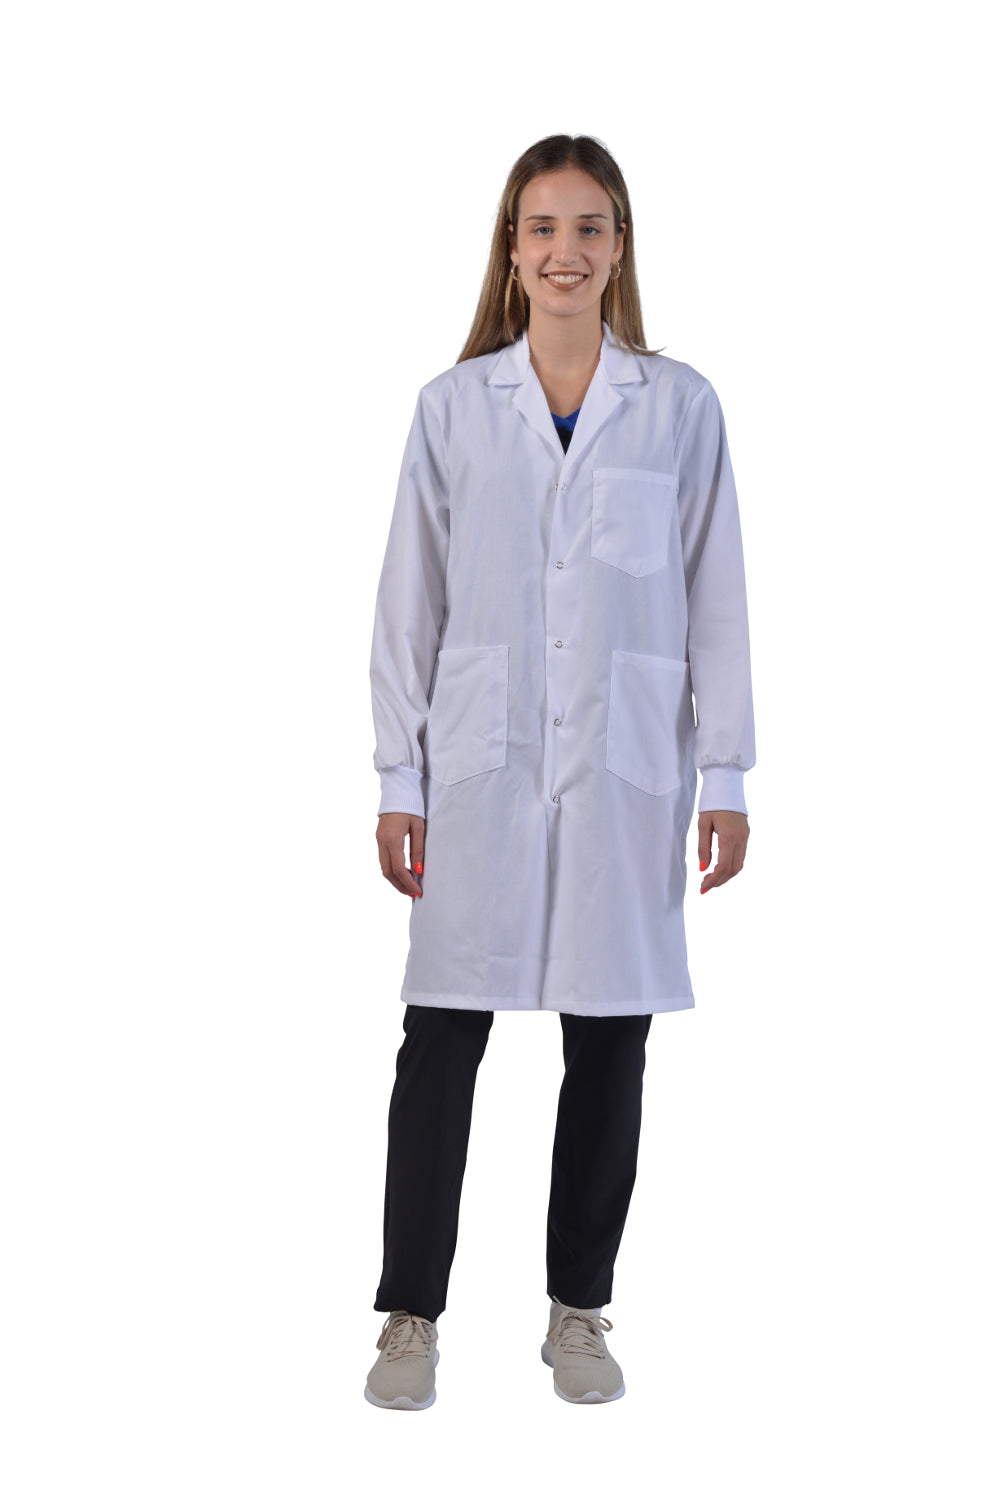 White - Avida Lab Coats 42" Unisex Lab Coat with Knit Cuffs (CLEARANCE)